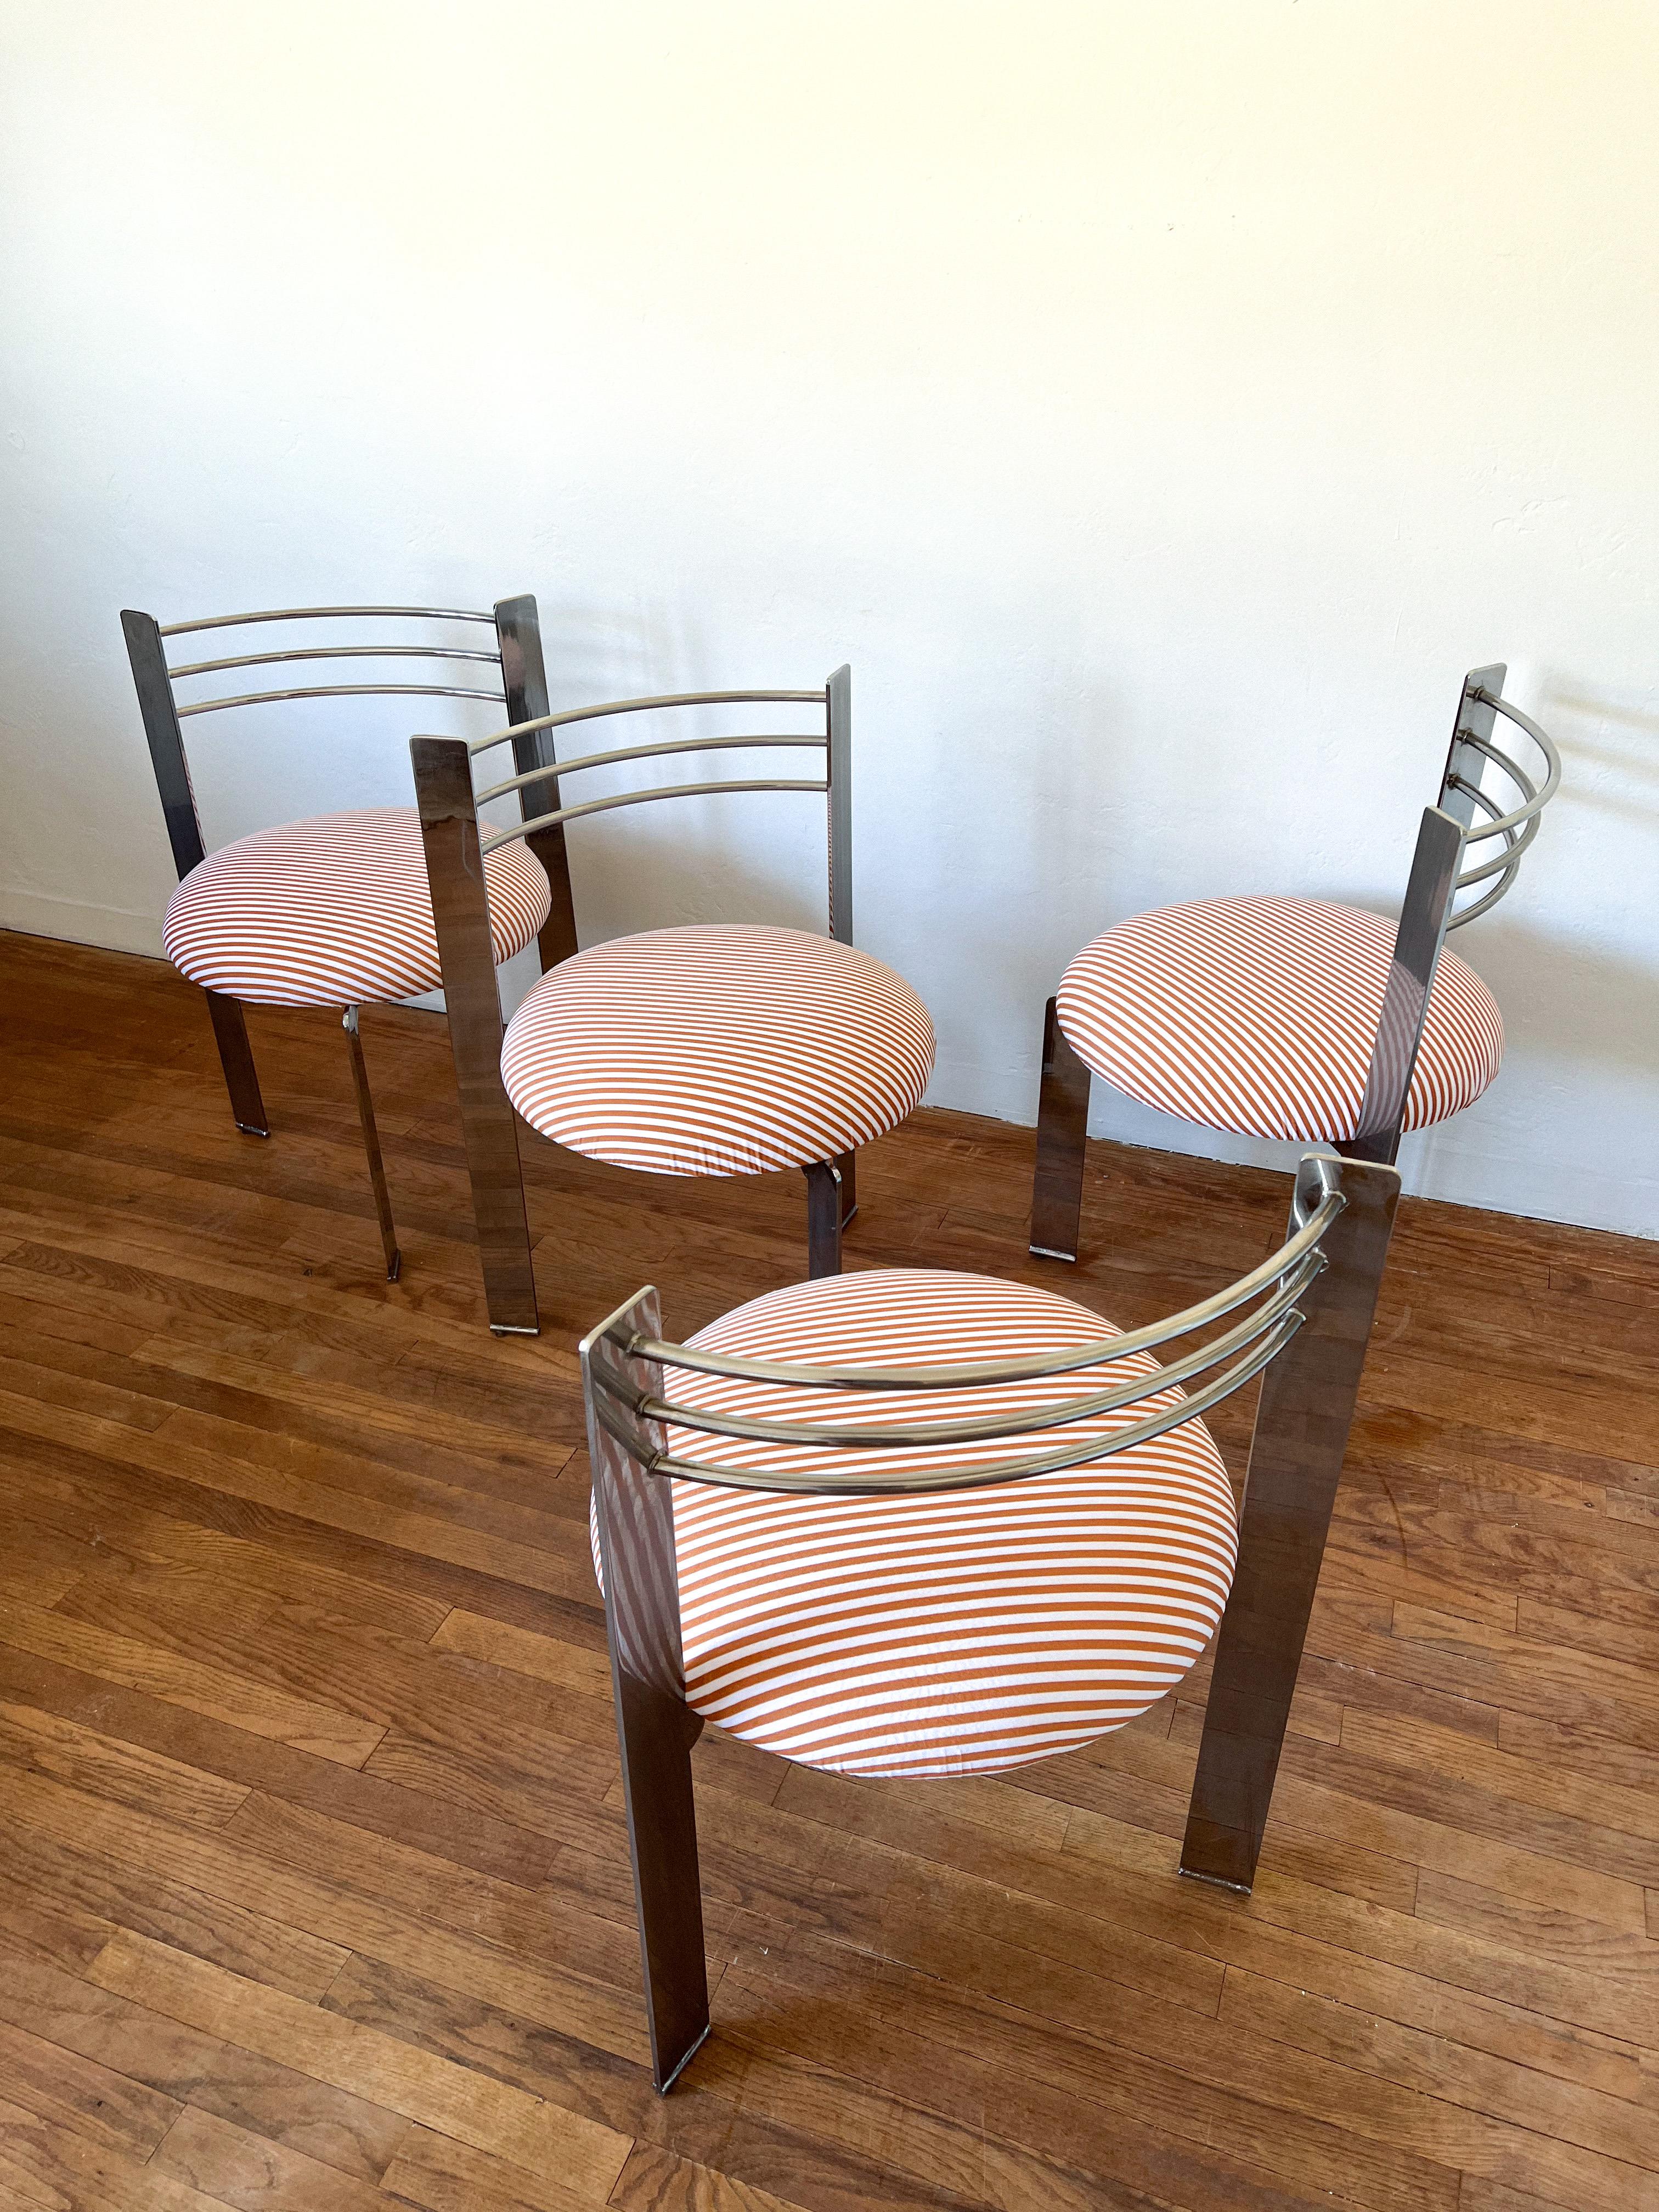 Set of four Memphis style dining chairs. Heavy and sturdy tripod chrome frames with newly reupholstered seats featuring a high end ultra modern performance velvet fabric with cream and mustard stripes.